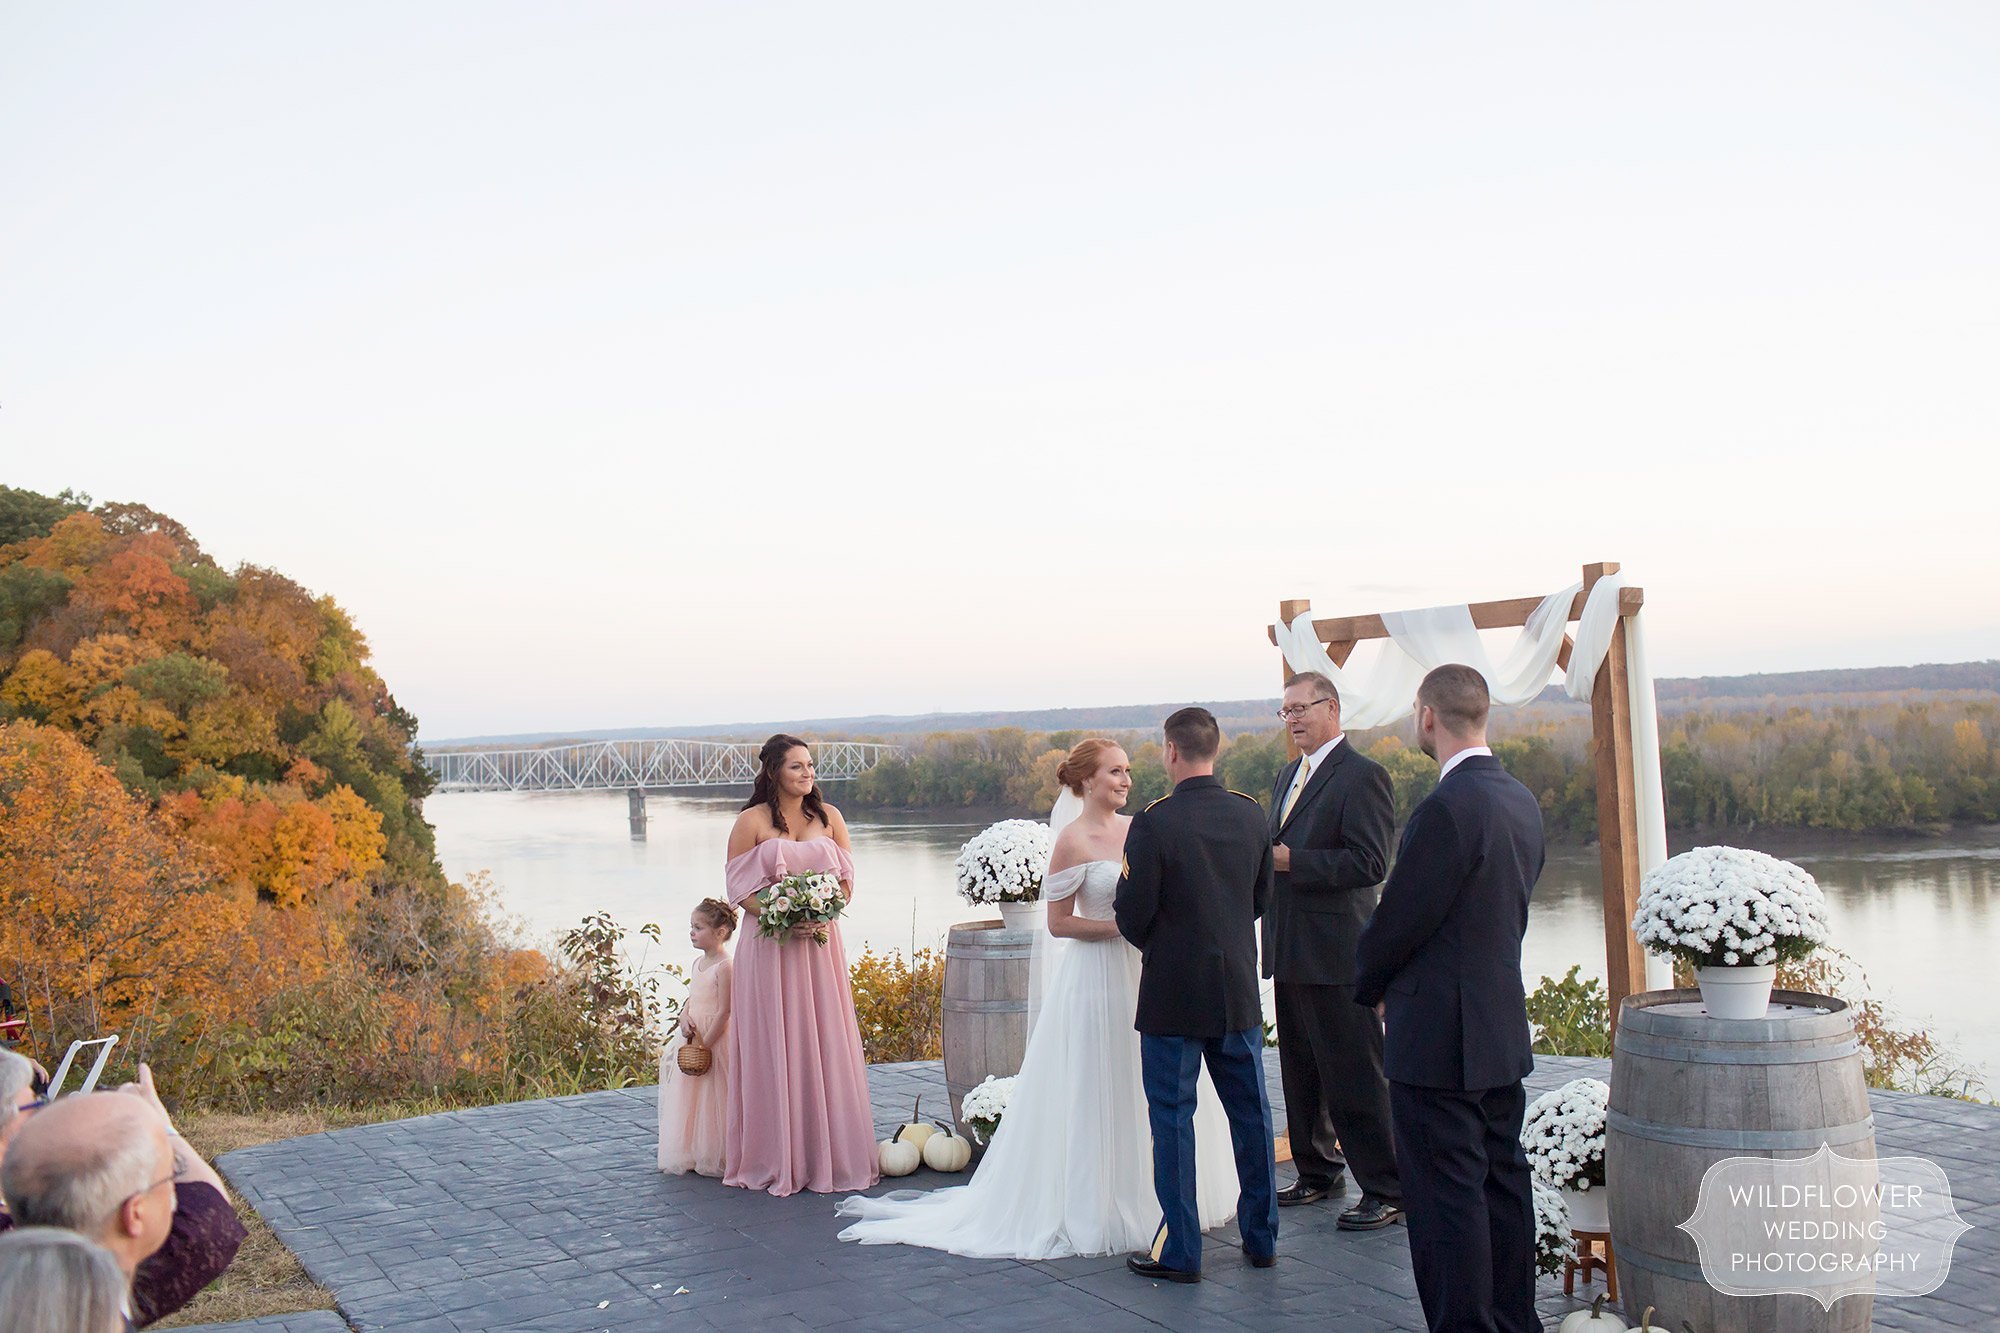 Beautiful outdoor wedding ceremony overlooking river at Les Bourgeois.